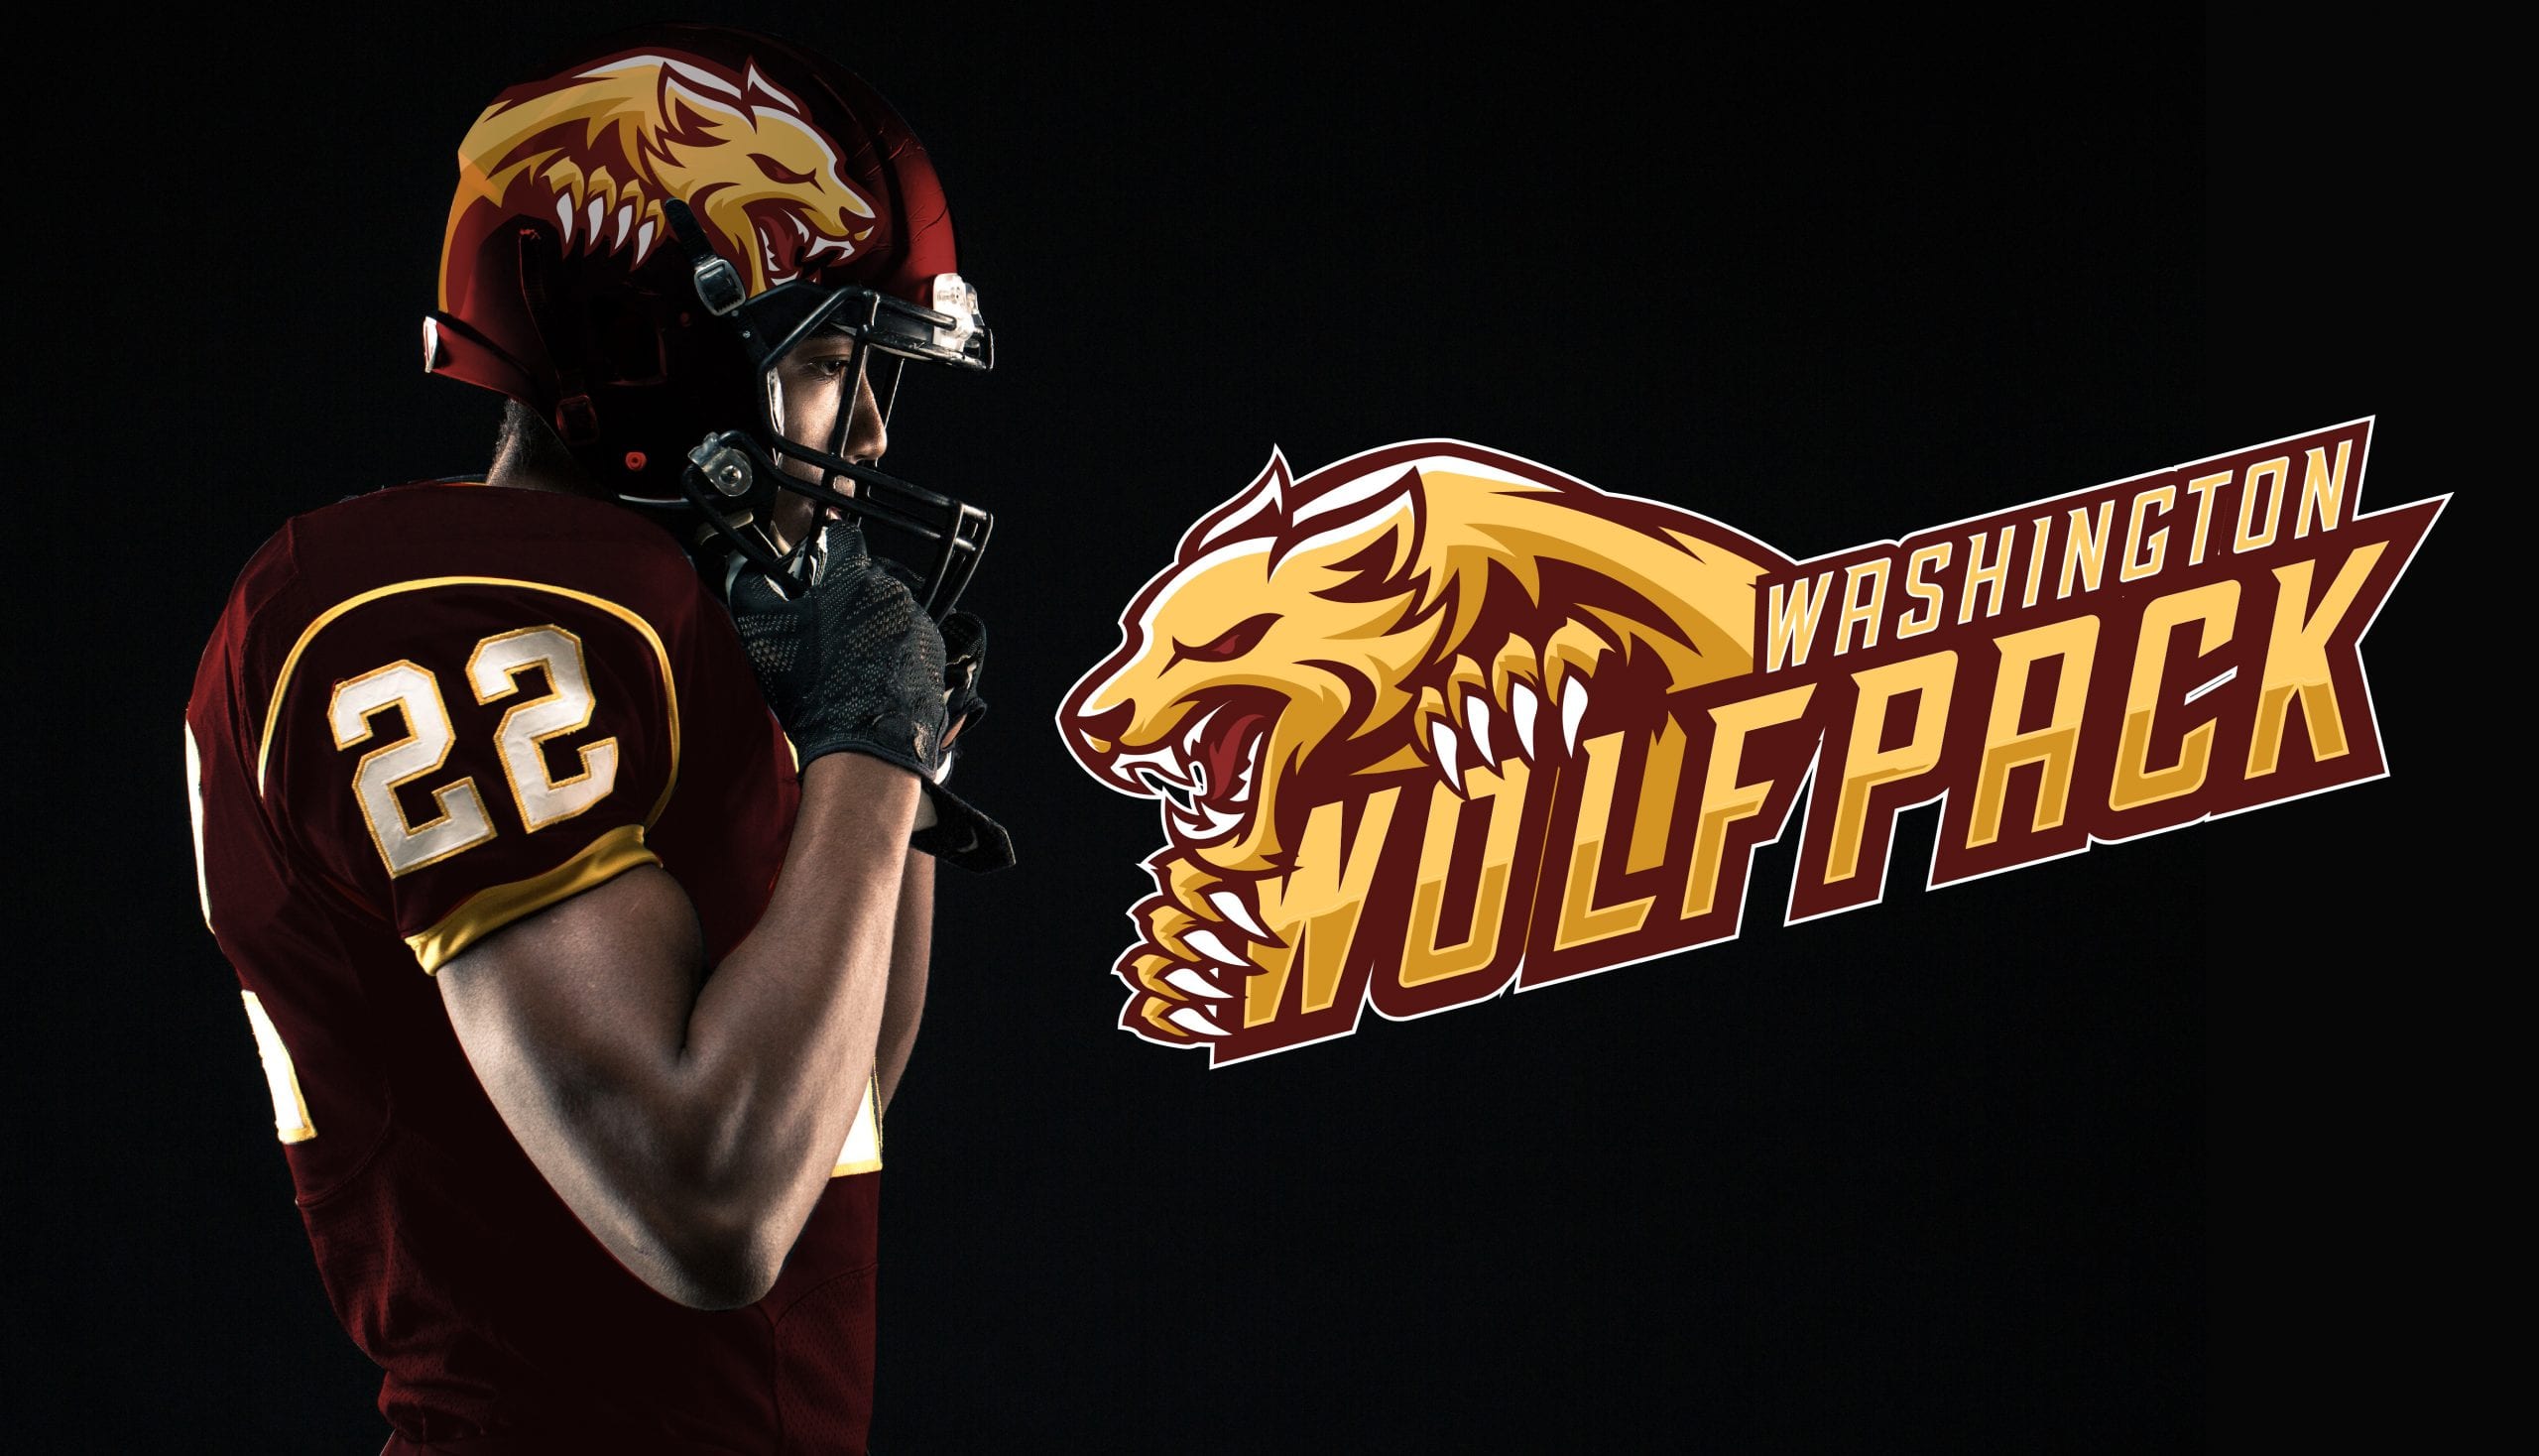 New Brand and Name Revealed for Washington Football Team